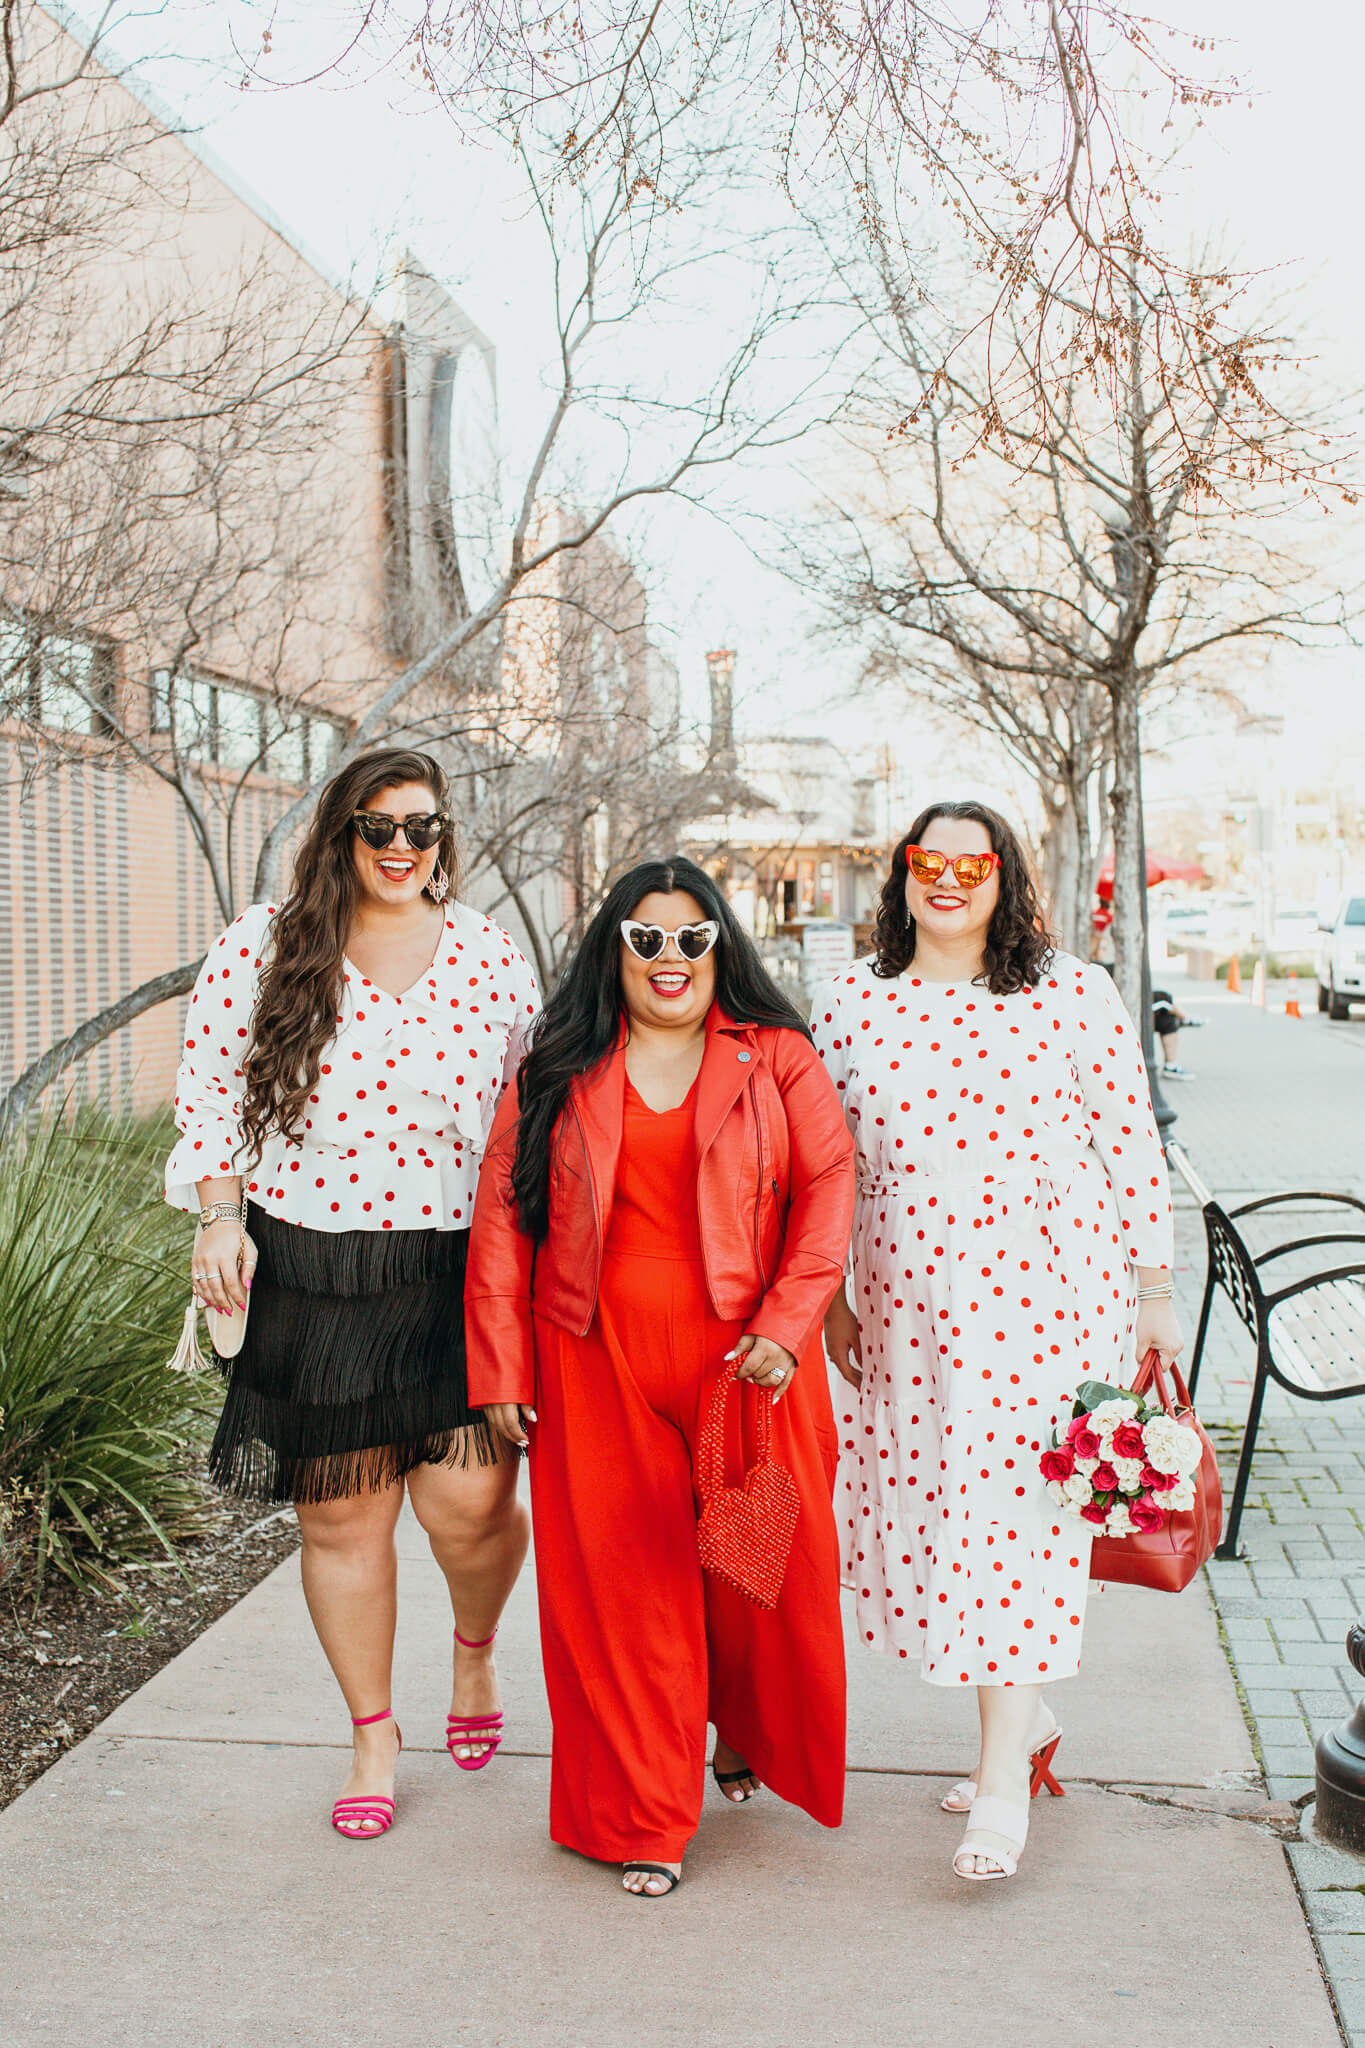 What to wear for Valentine's Day plus size?